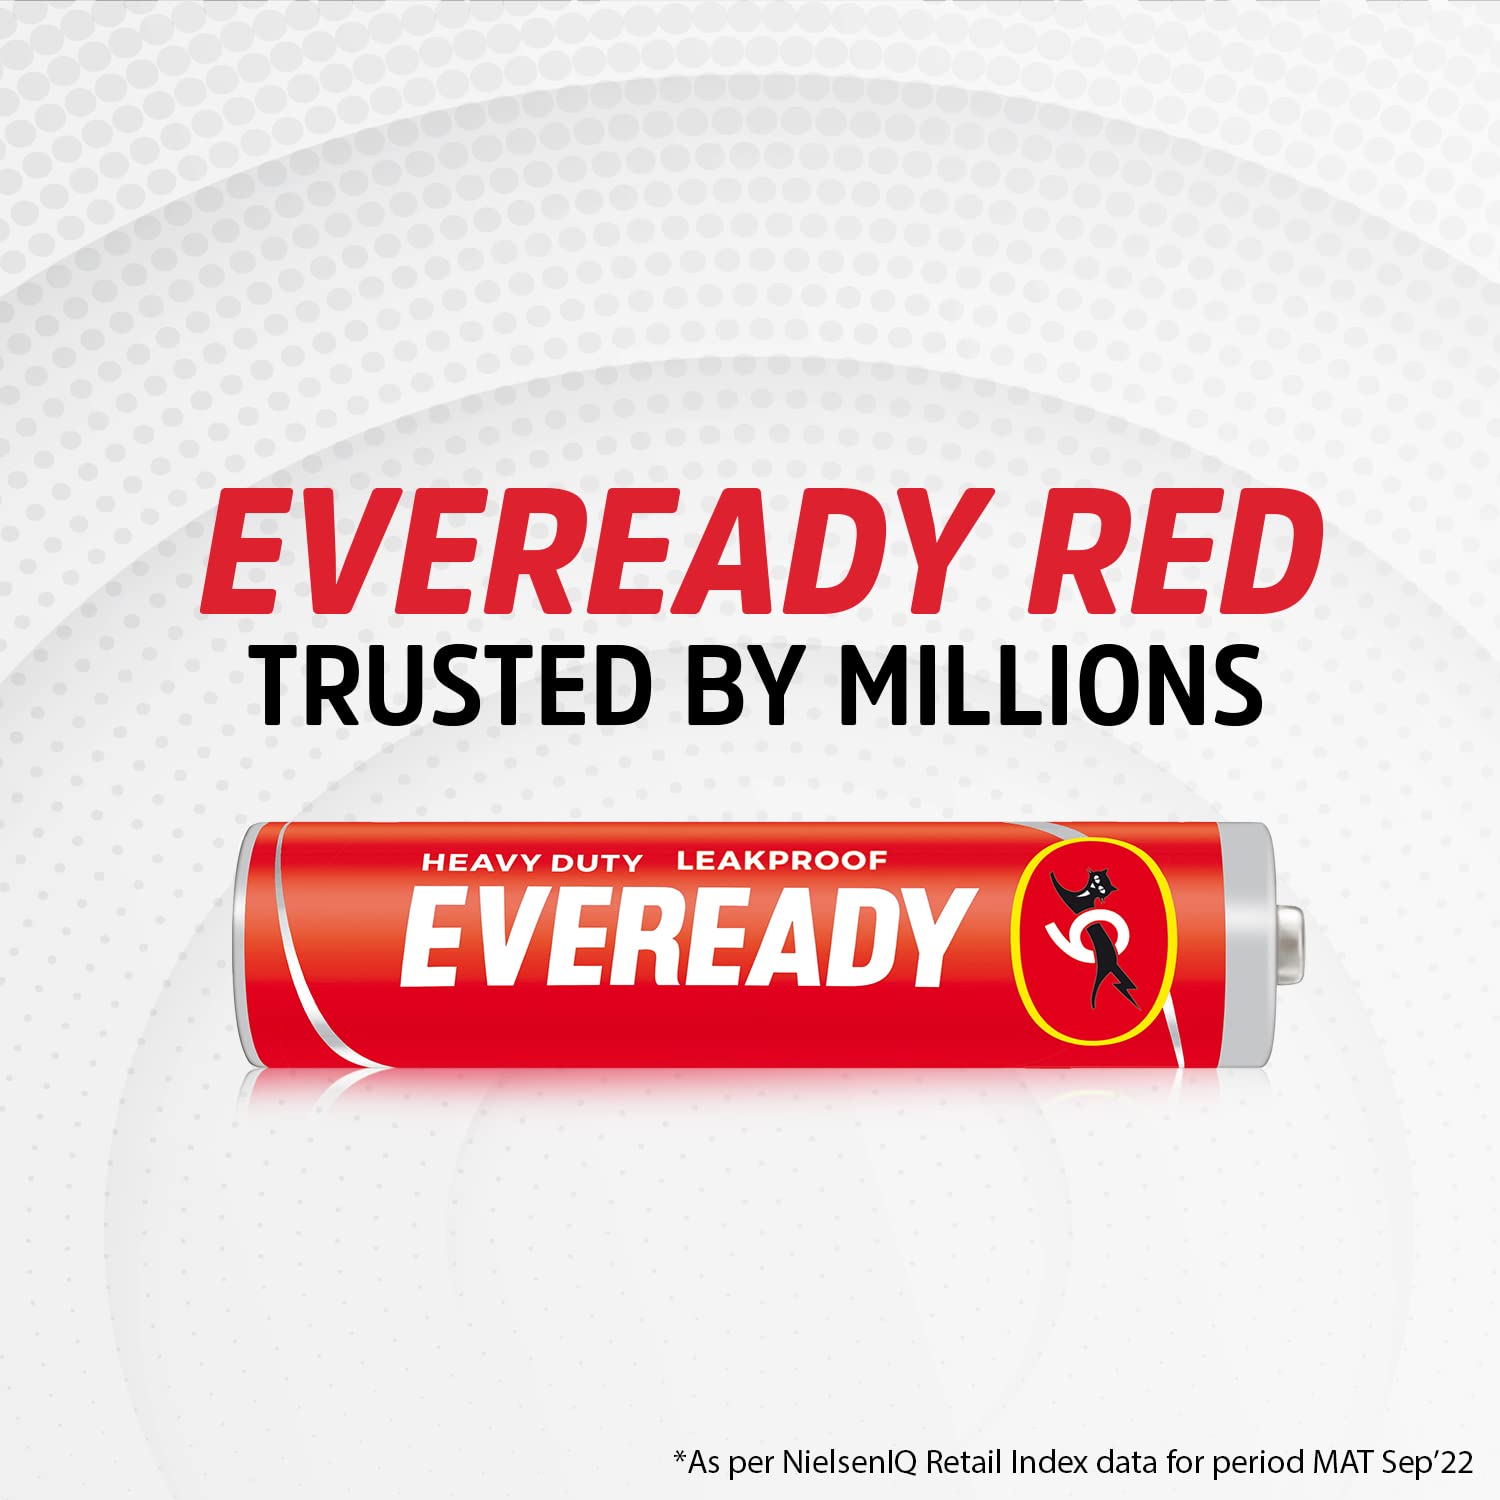 Eveready Give Me Red Aaa 1012 Battery 1Pc